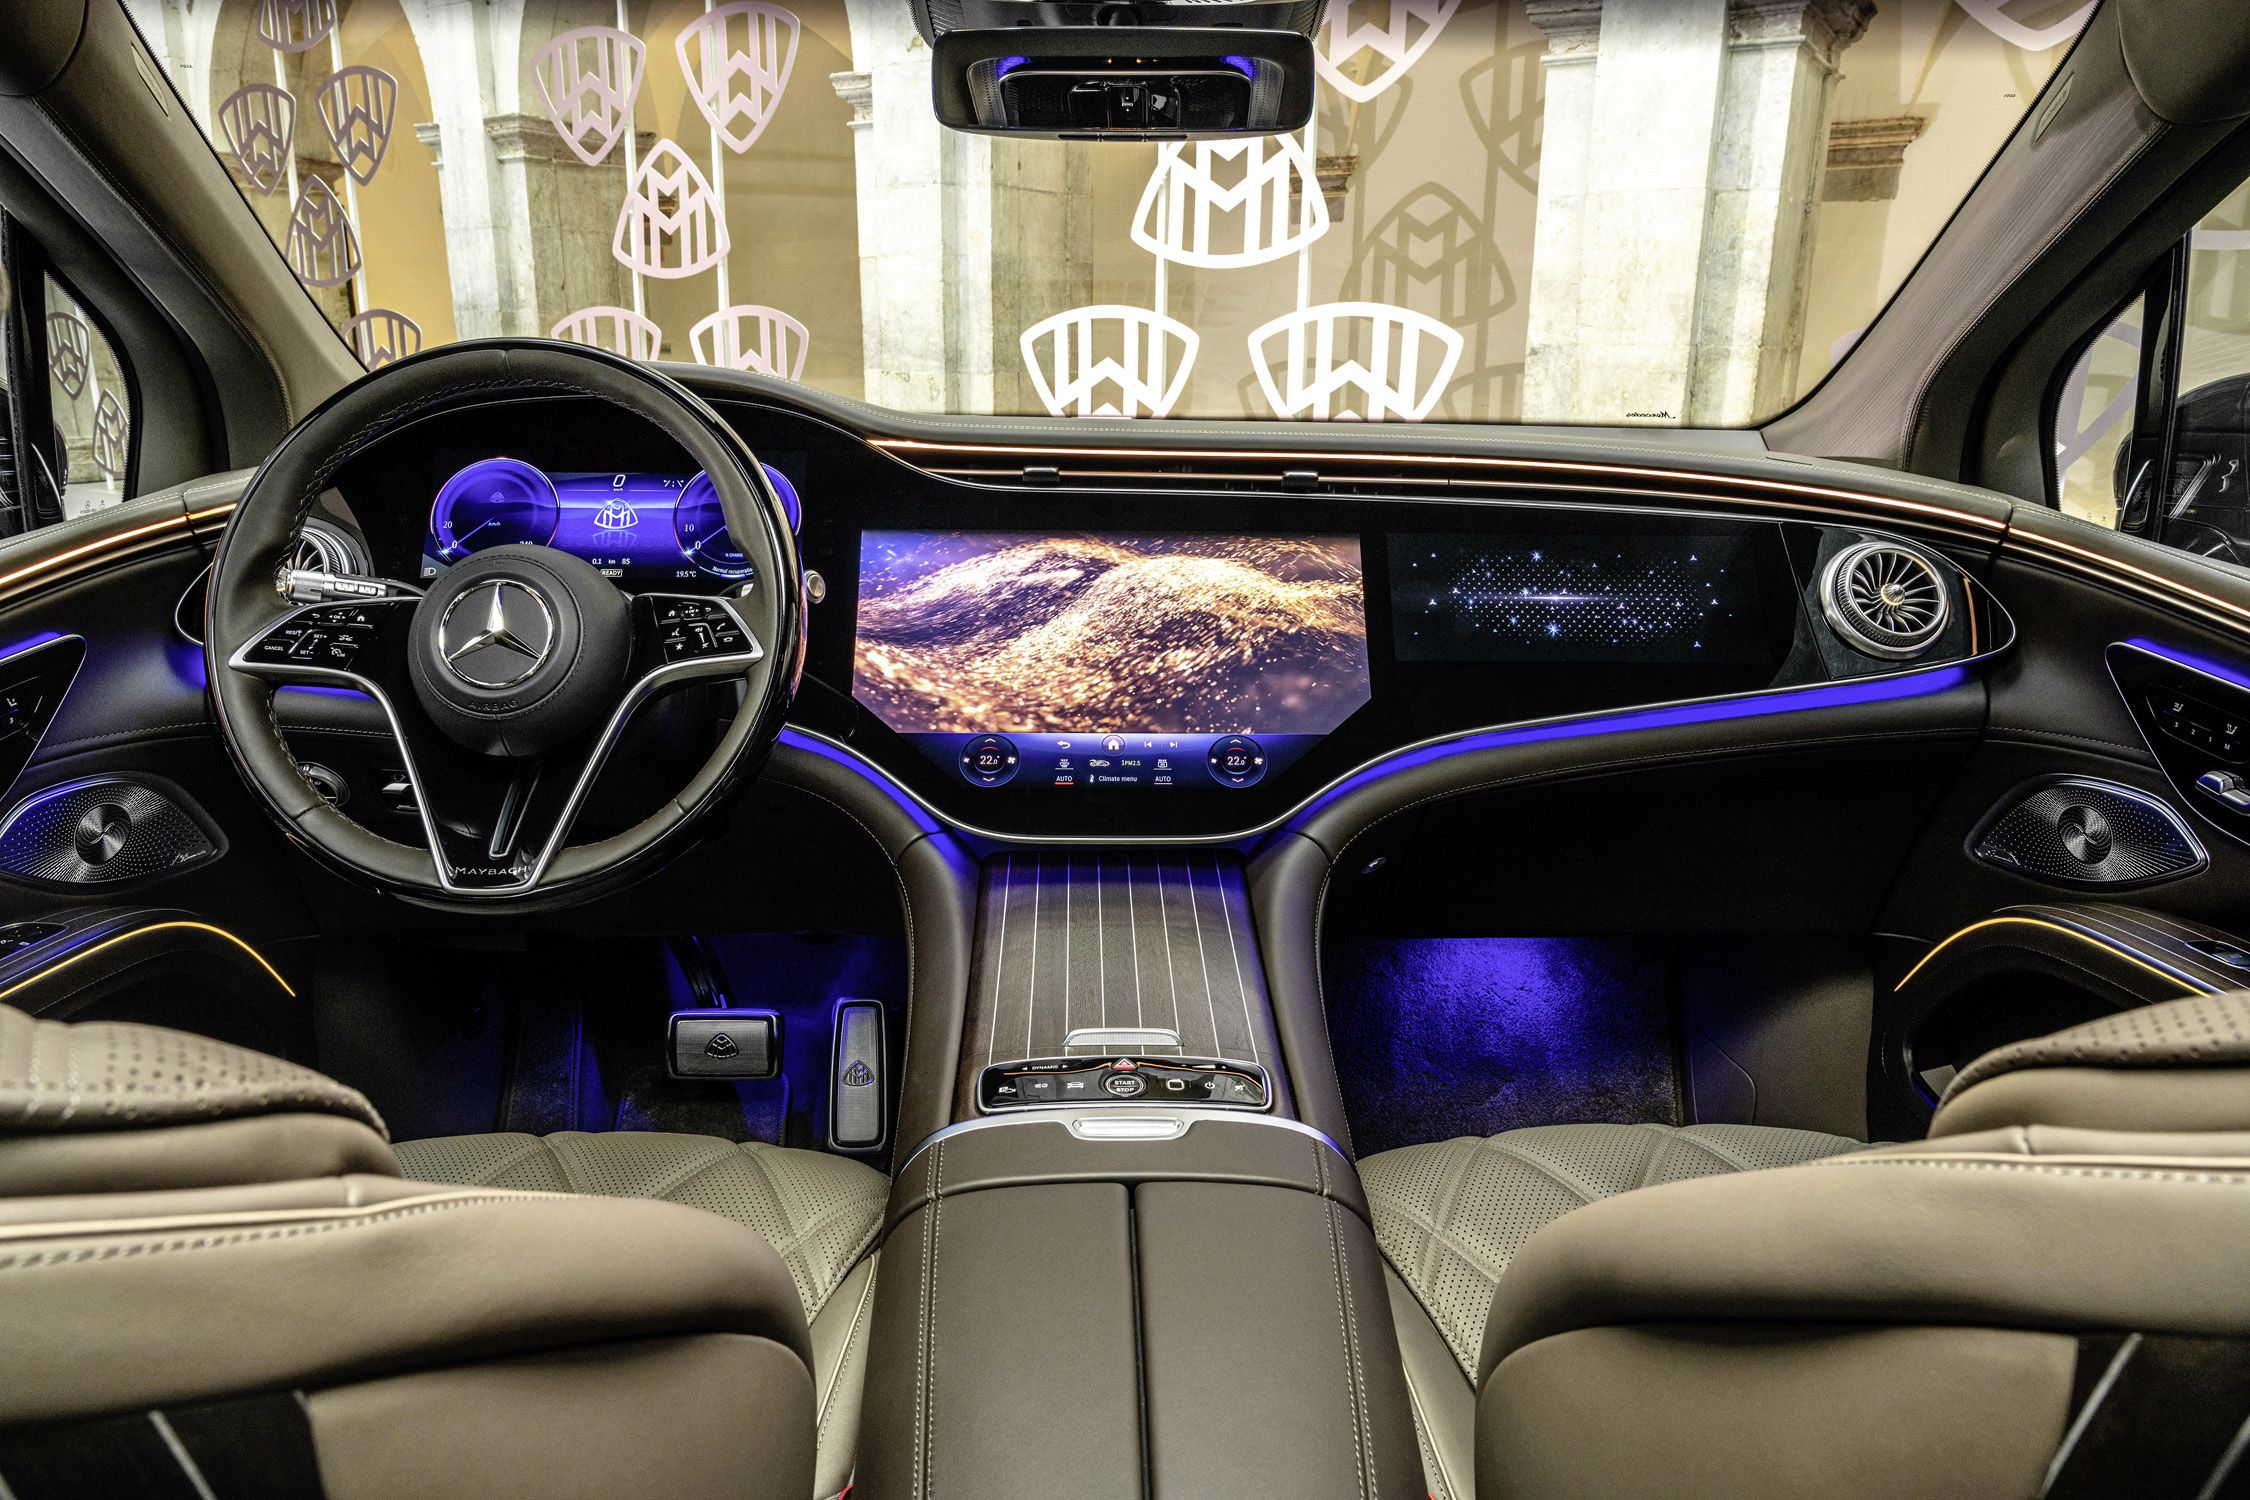 Progressive and luxurious: the interior of the new EQS SUV